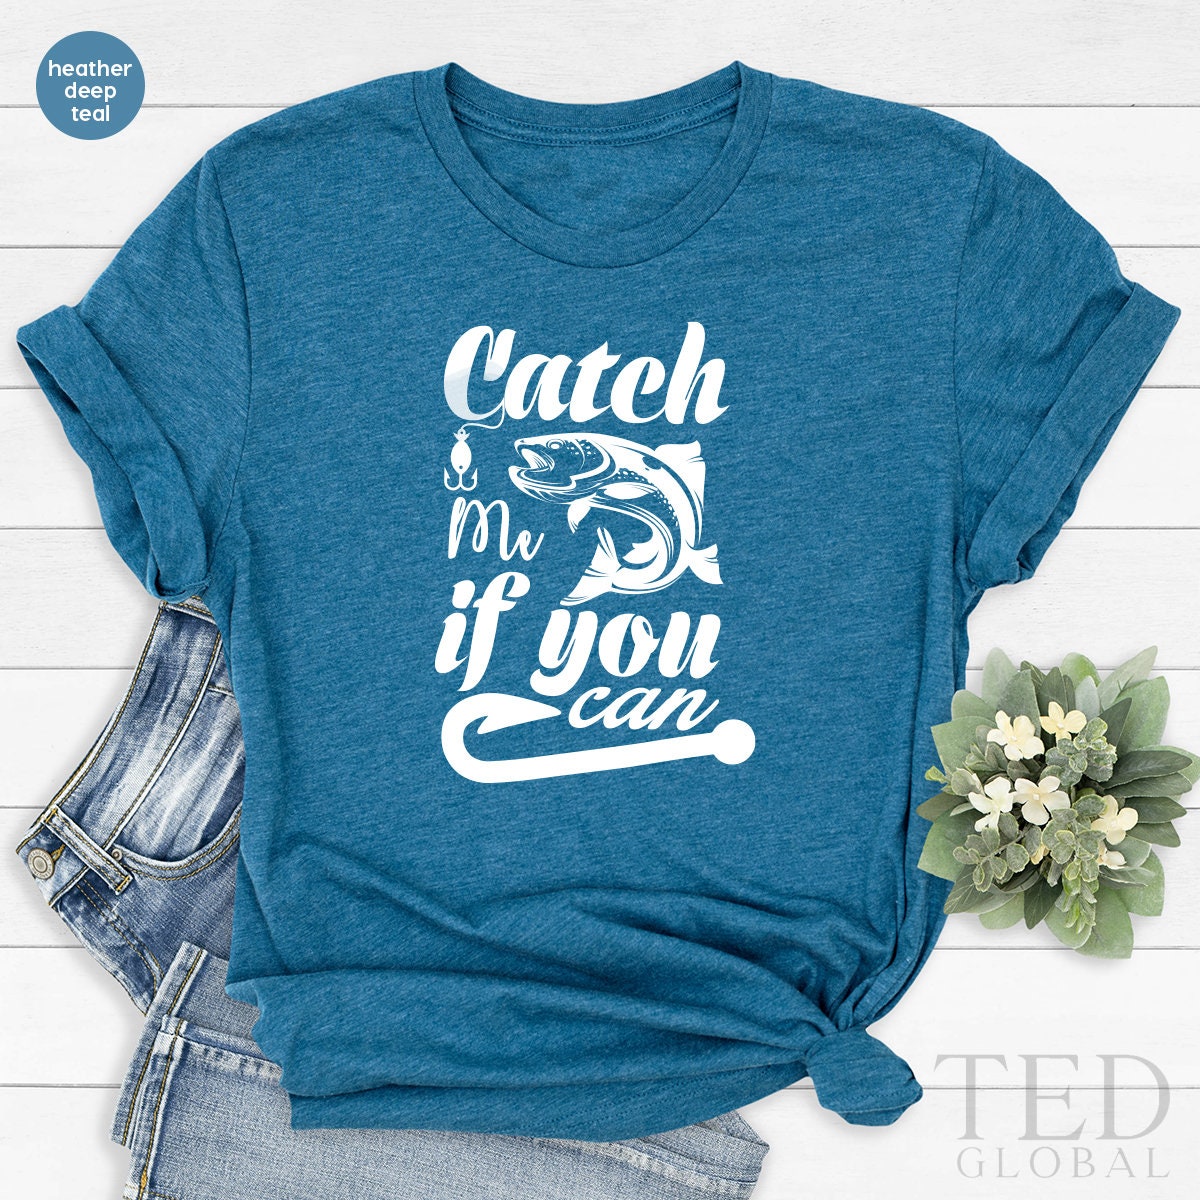 Fishing TShirt, Cool Fisherman T Shirt, Fisher Men Shirt, Shirt For Fly Fisher Dad, Fathers Day Shirt, Boating Lover Tees, Gift For Husband - Fastdeliverytees.com